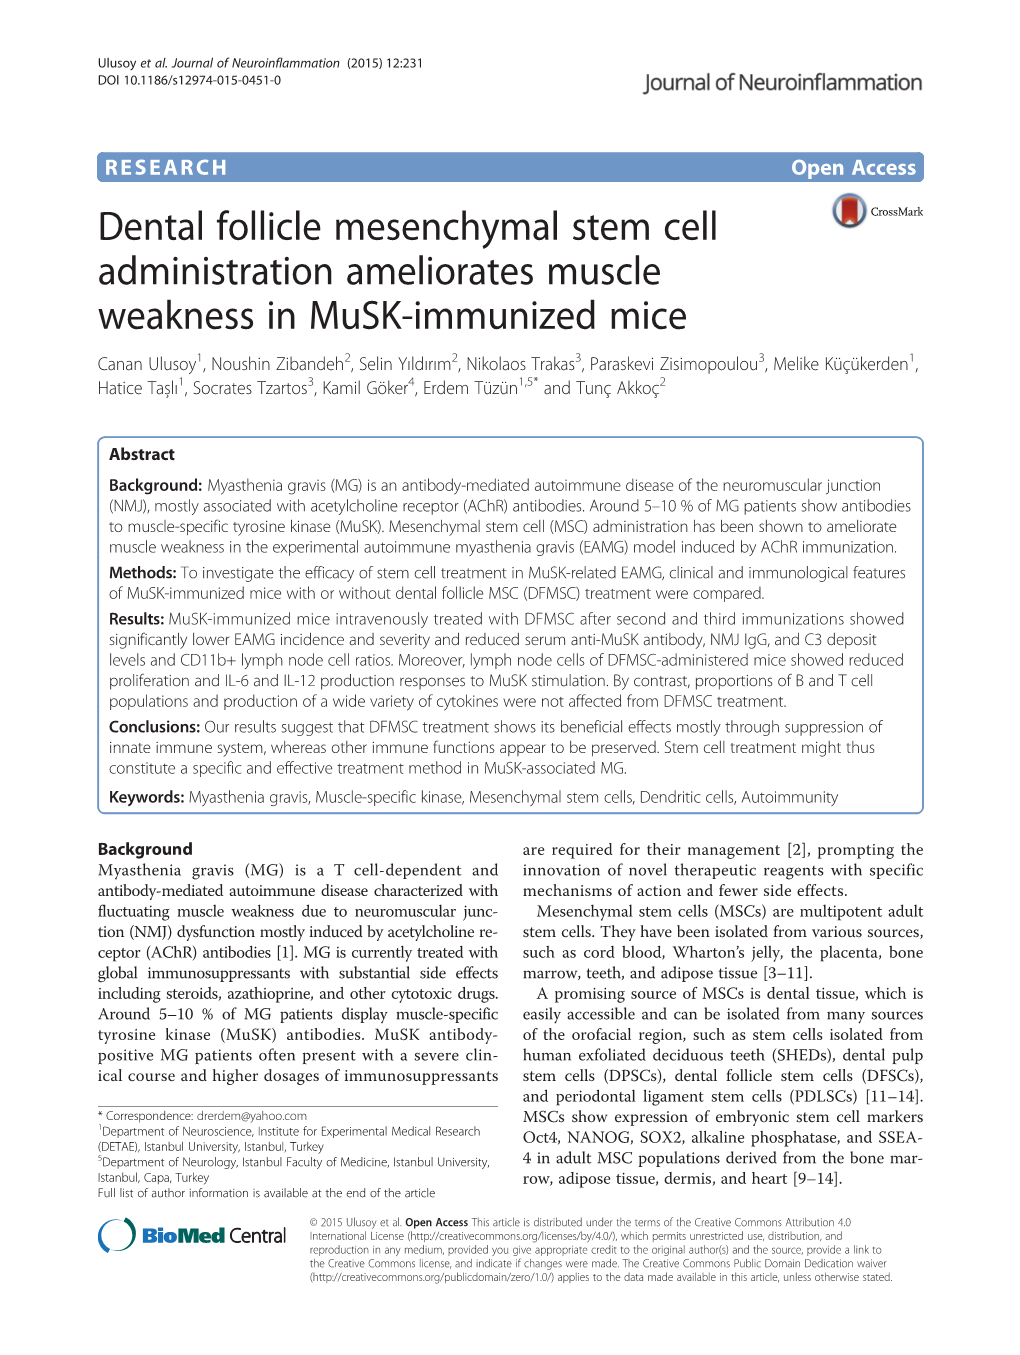 Dental Follicle Mesenchymal Stem Cell Administration Ameliorates Muscle